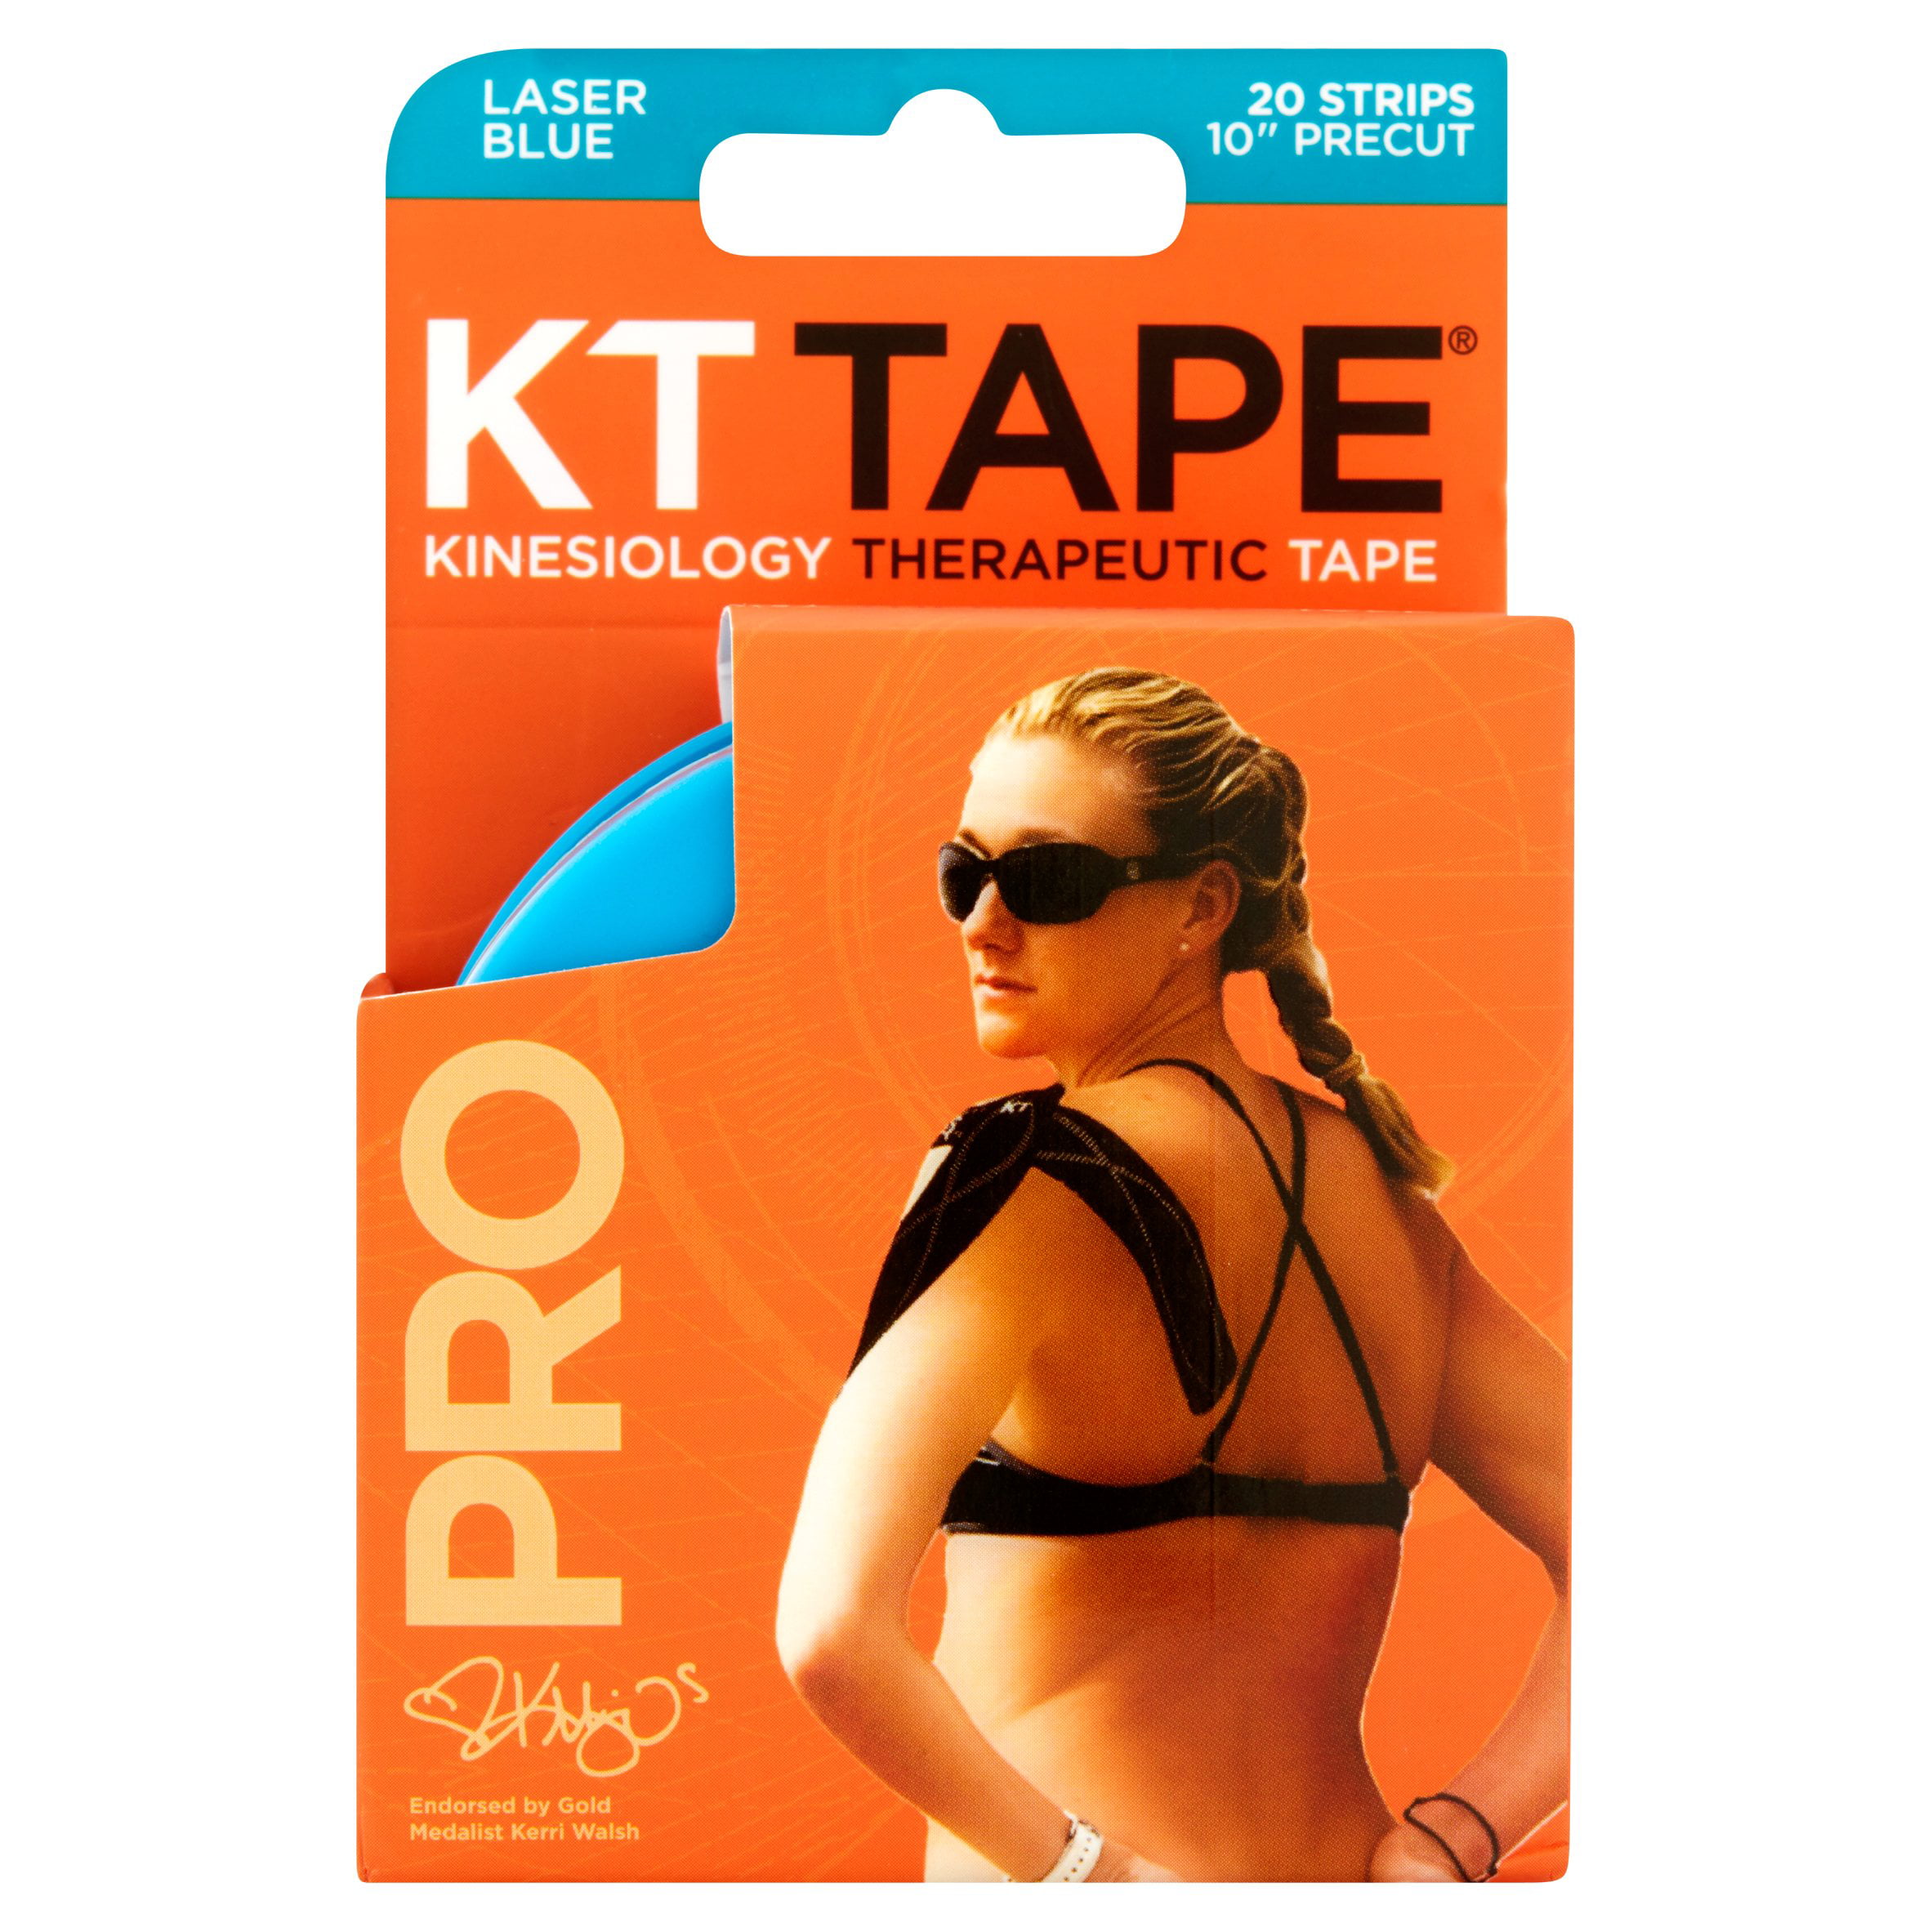 KT Tape Original 20 Strip Cotton Precut Kinesiology Tape FREE Next Day Delivery 